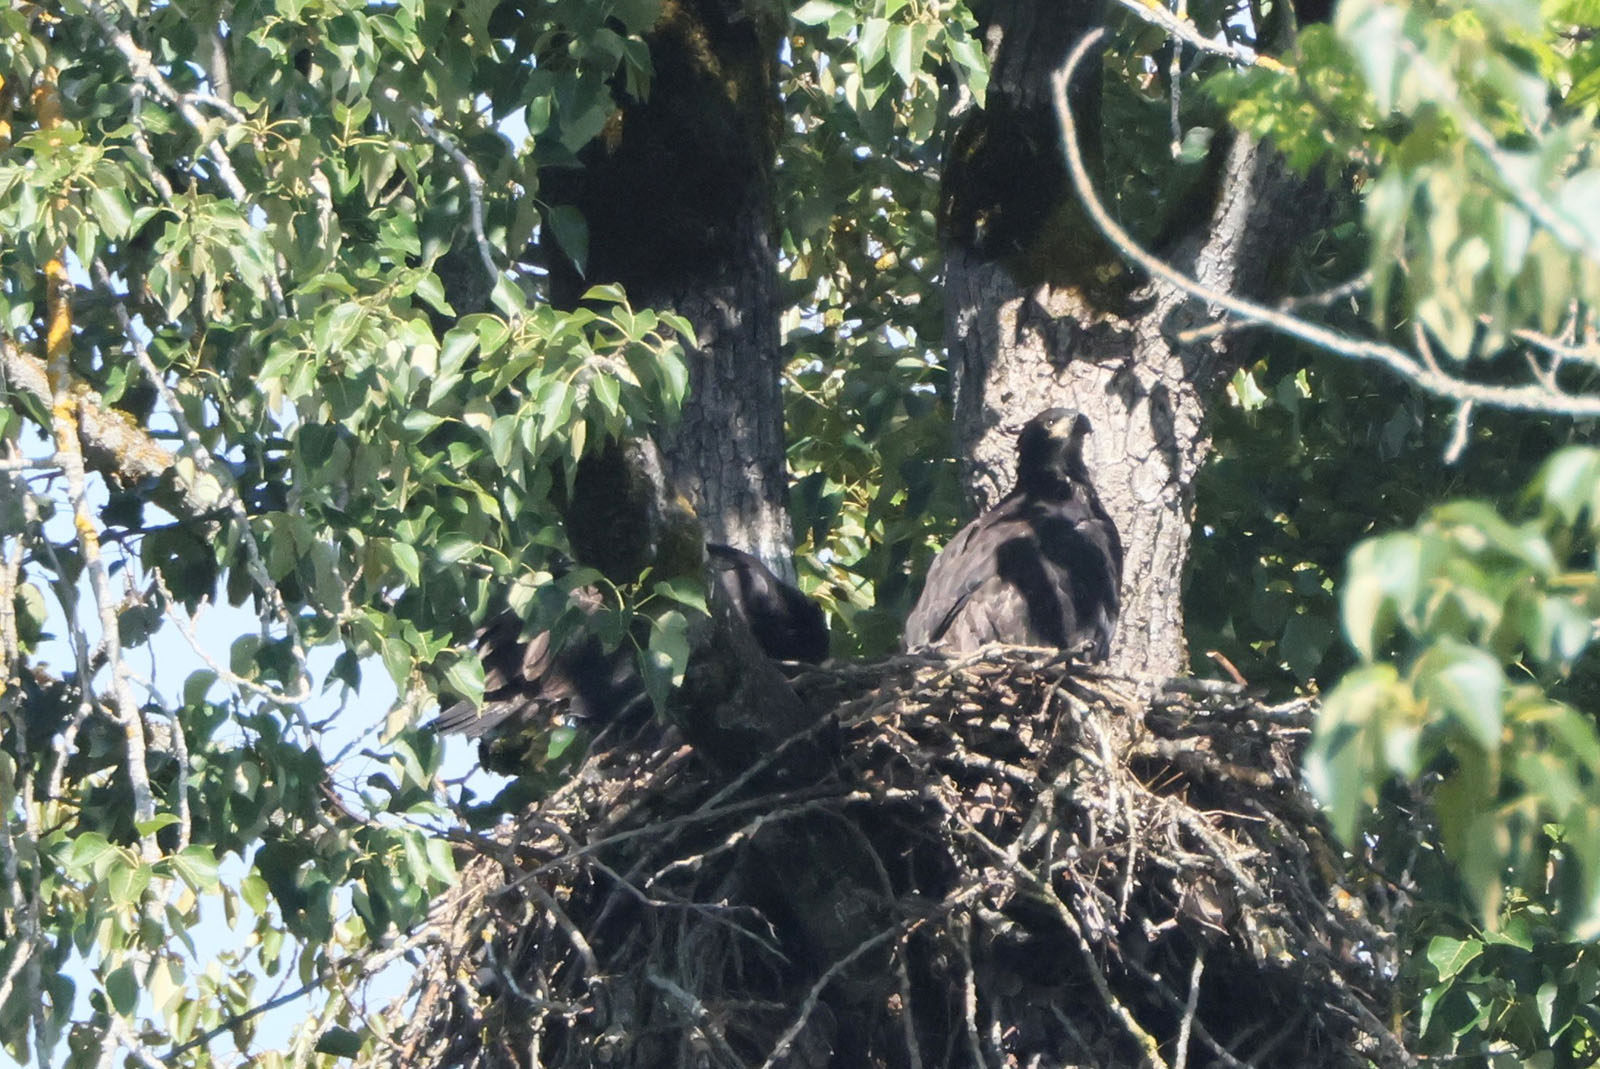 Eagle in Nest